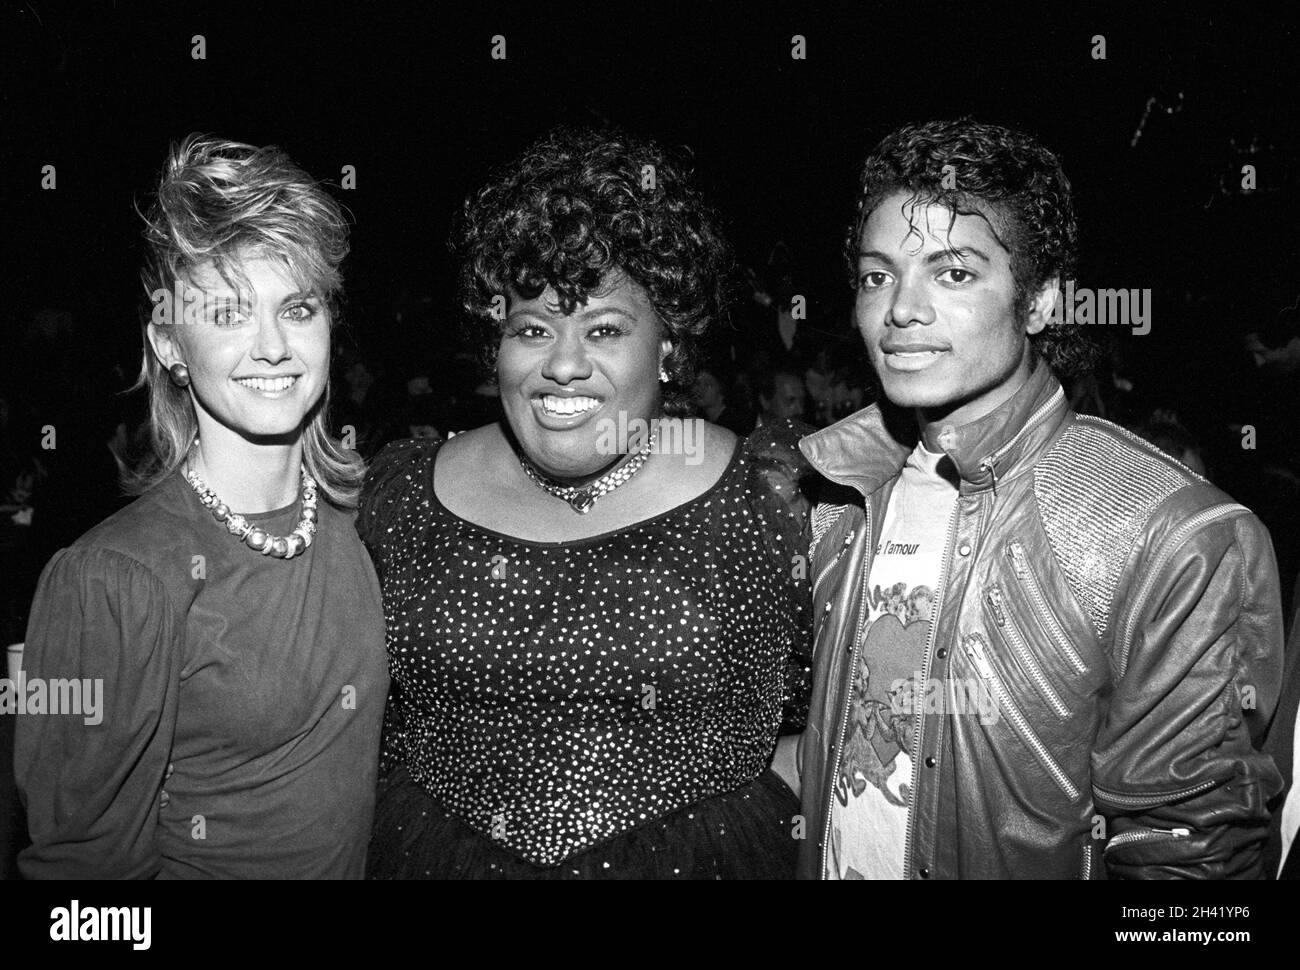 Olivia Newton John, Jennifer Holliday and Michael Jackson  at the 'Dreamgirls' opening night afterparty. Taken in Los Angeles at the Shubert Theater in Century City on March 20, 1983  Credit: Ralph Dominguez/MediaPunch Stock Photo